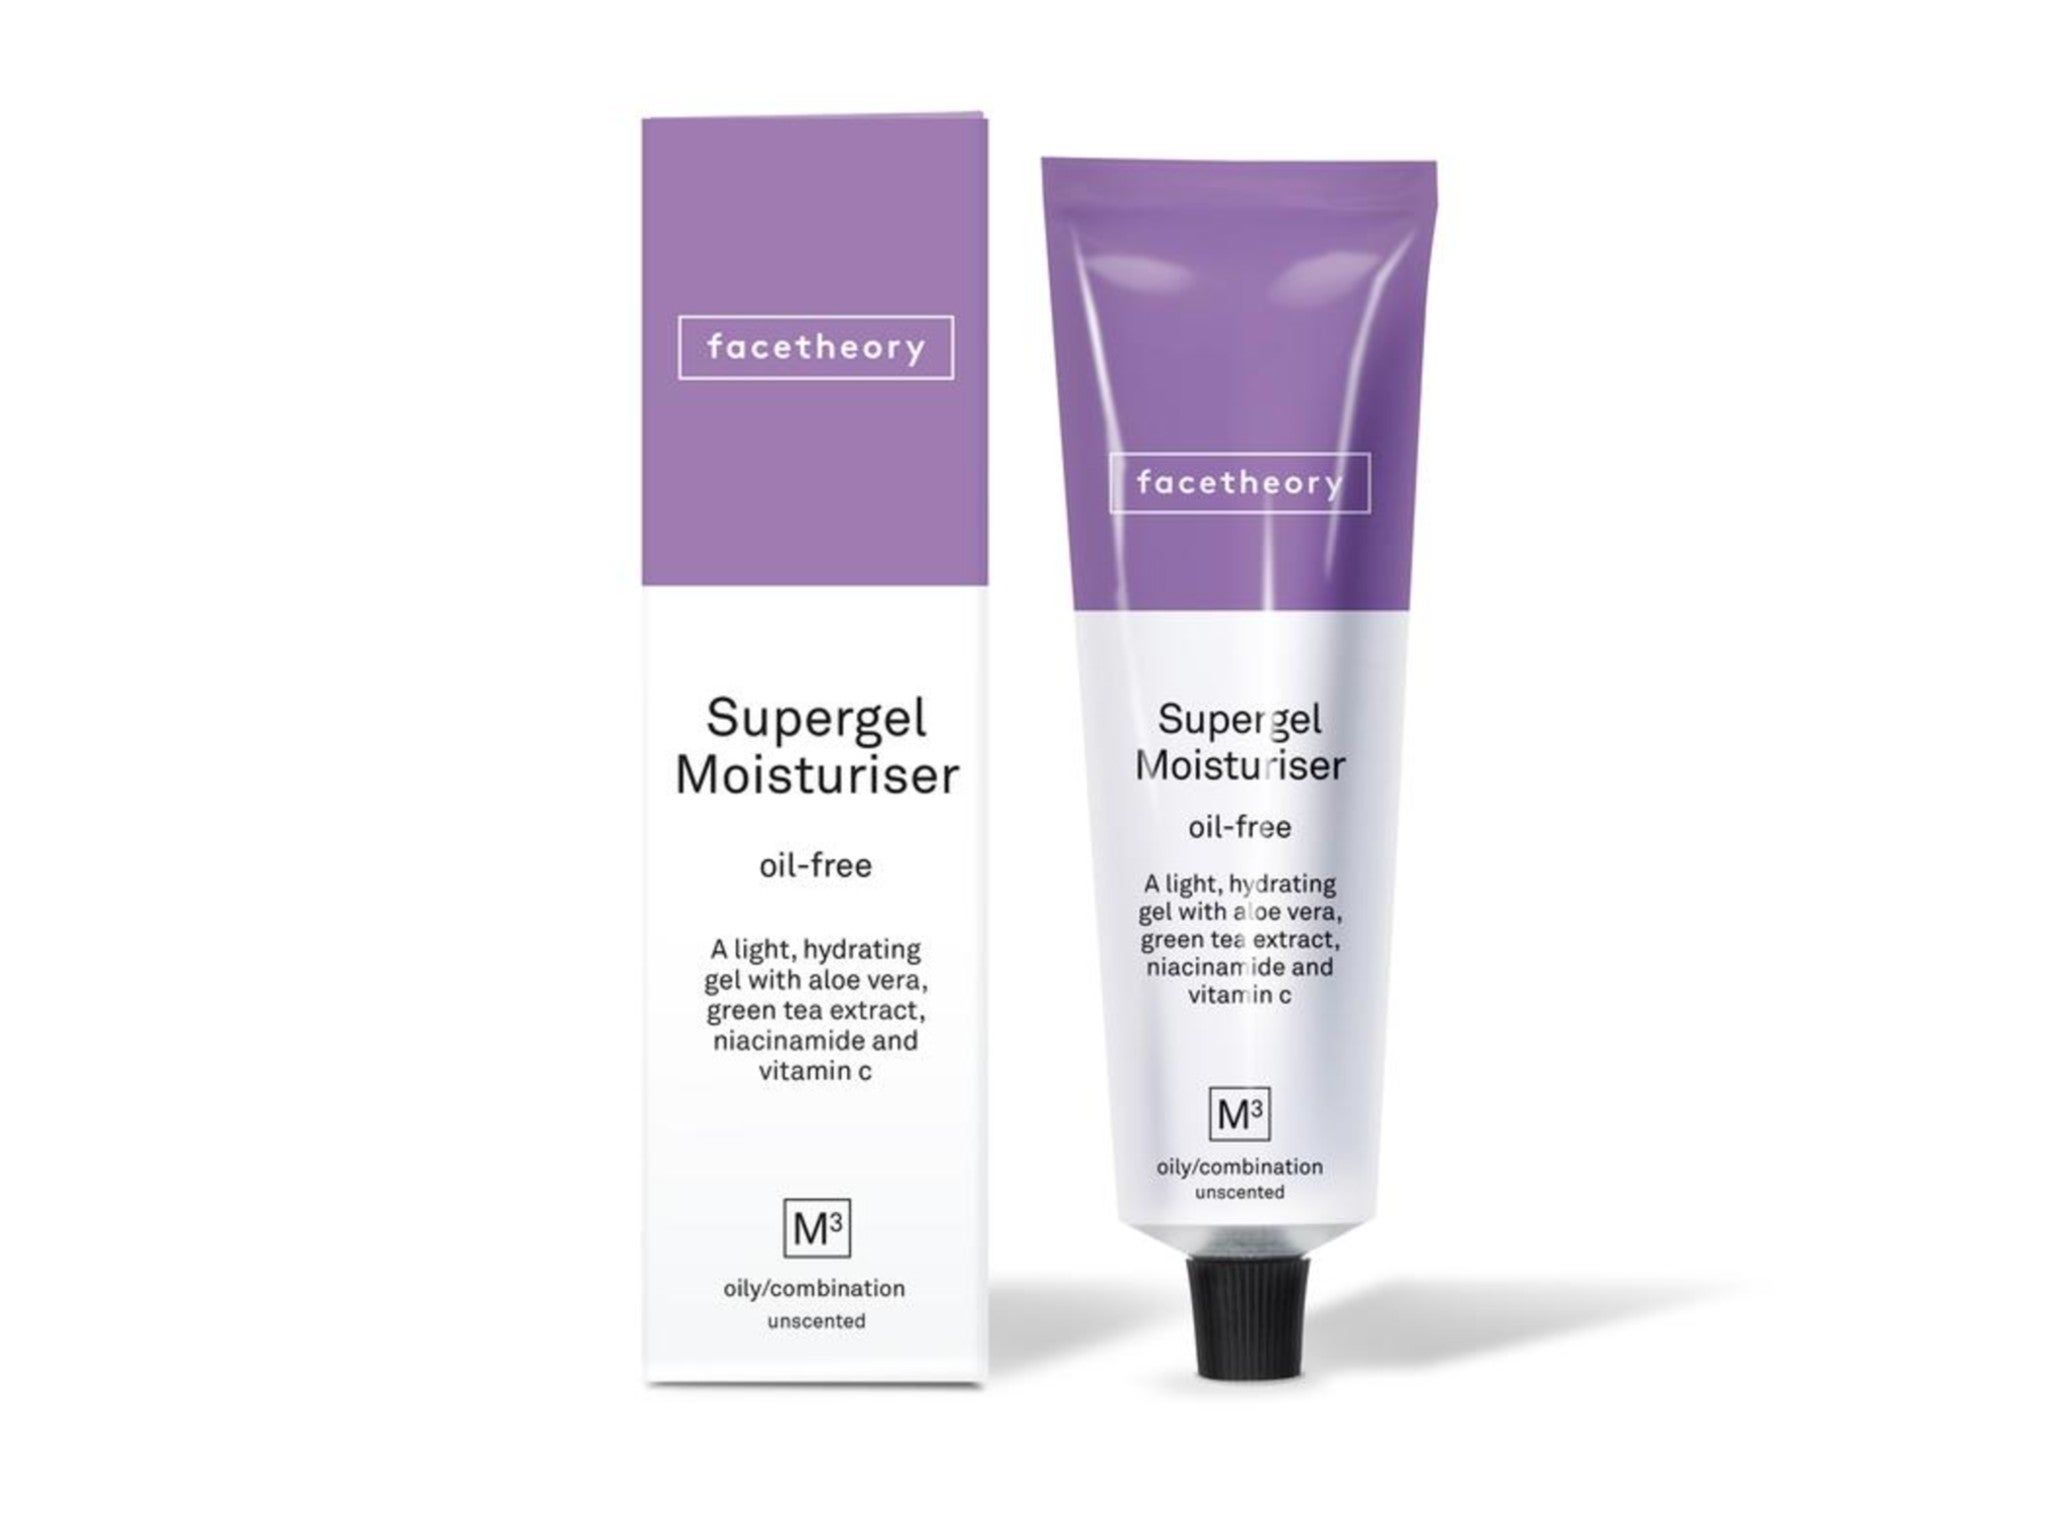 Facetheory supergel oil-free moisturiser M3 for oily and acne-prone skin indybest.jpeg